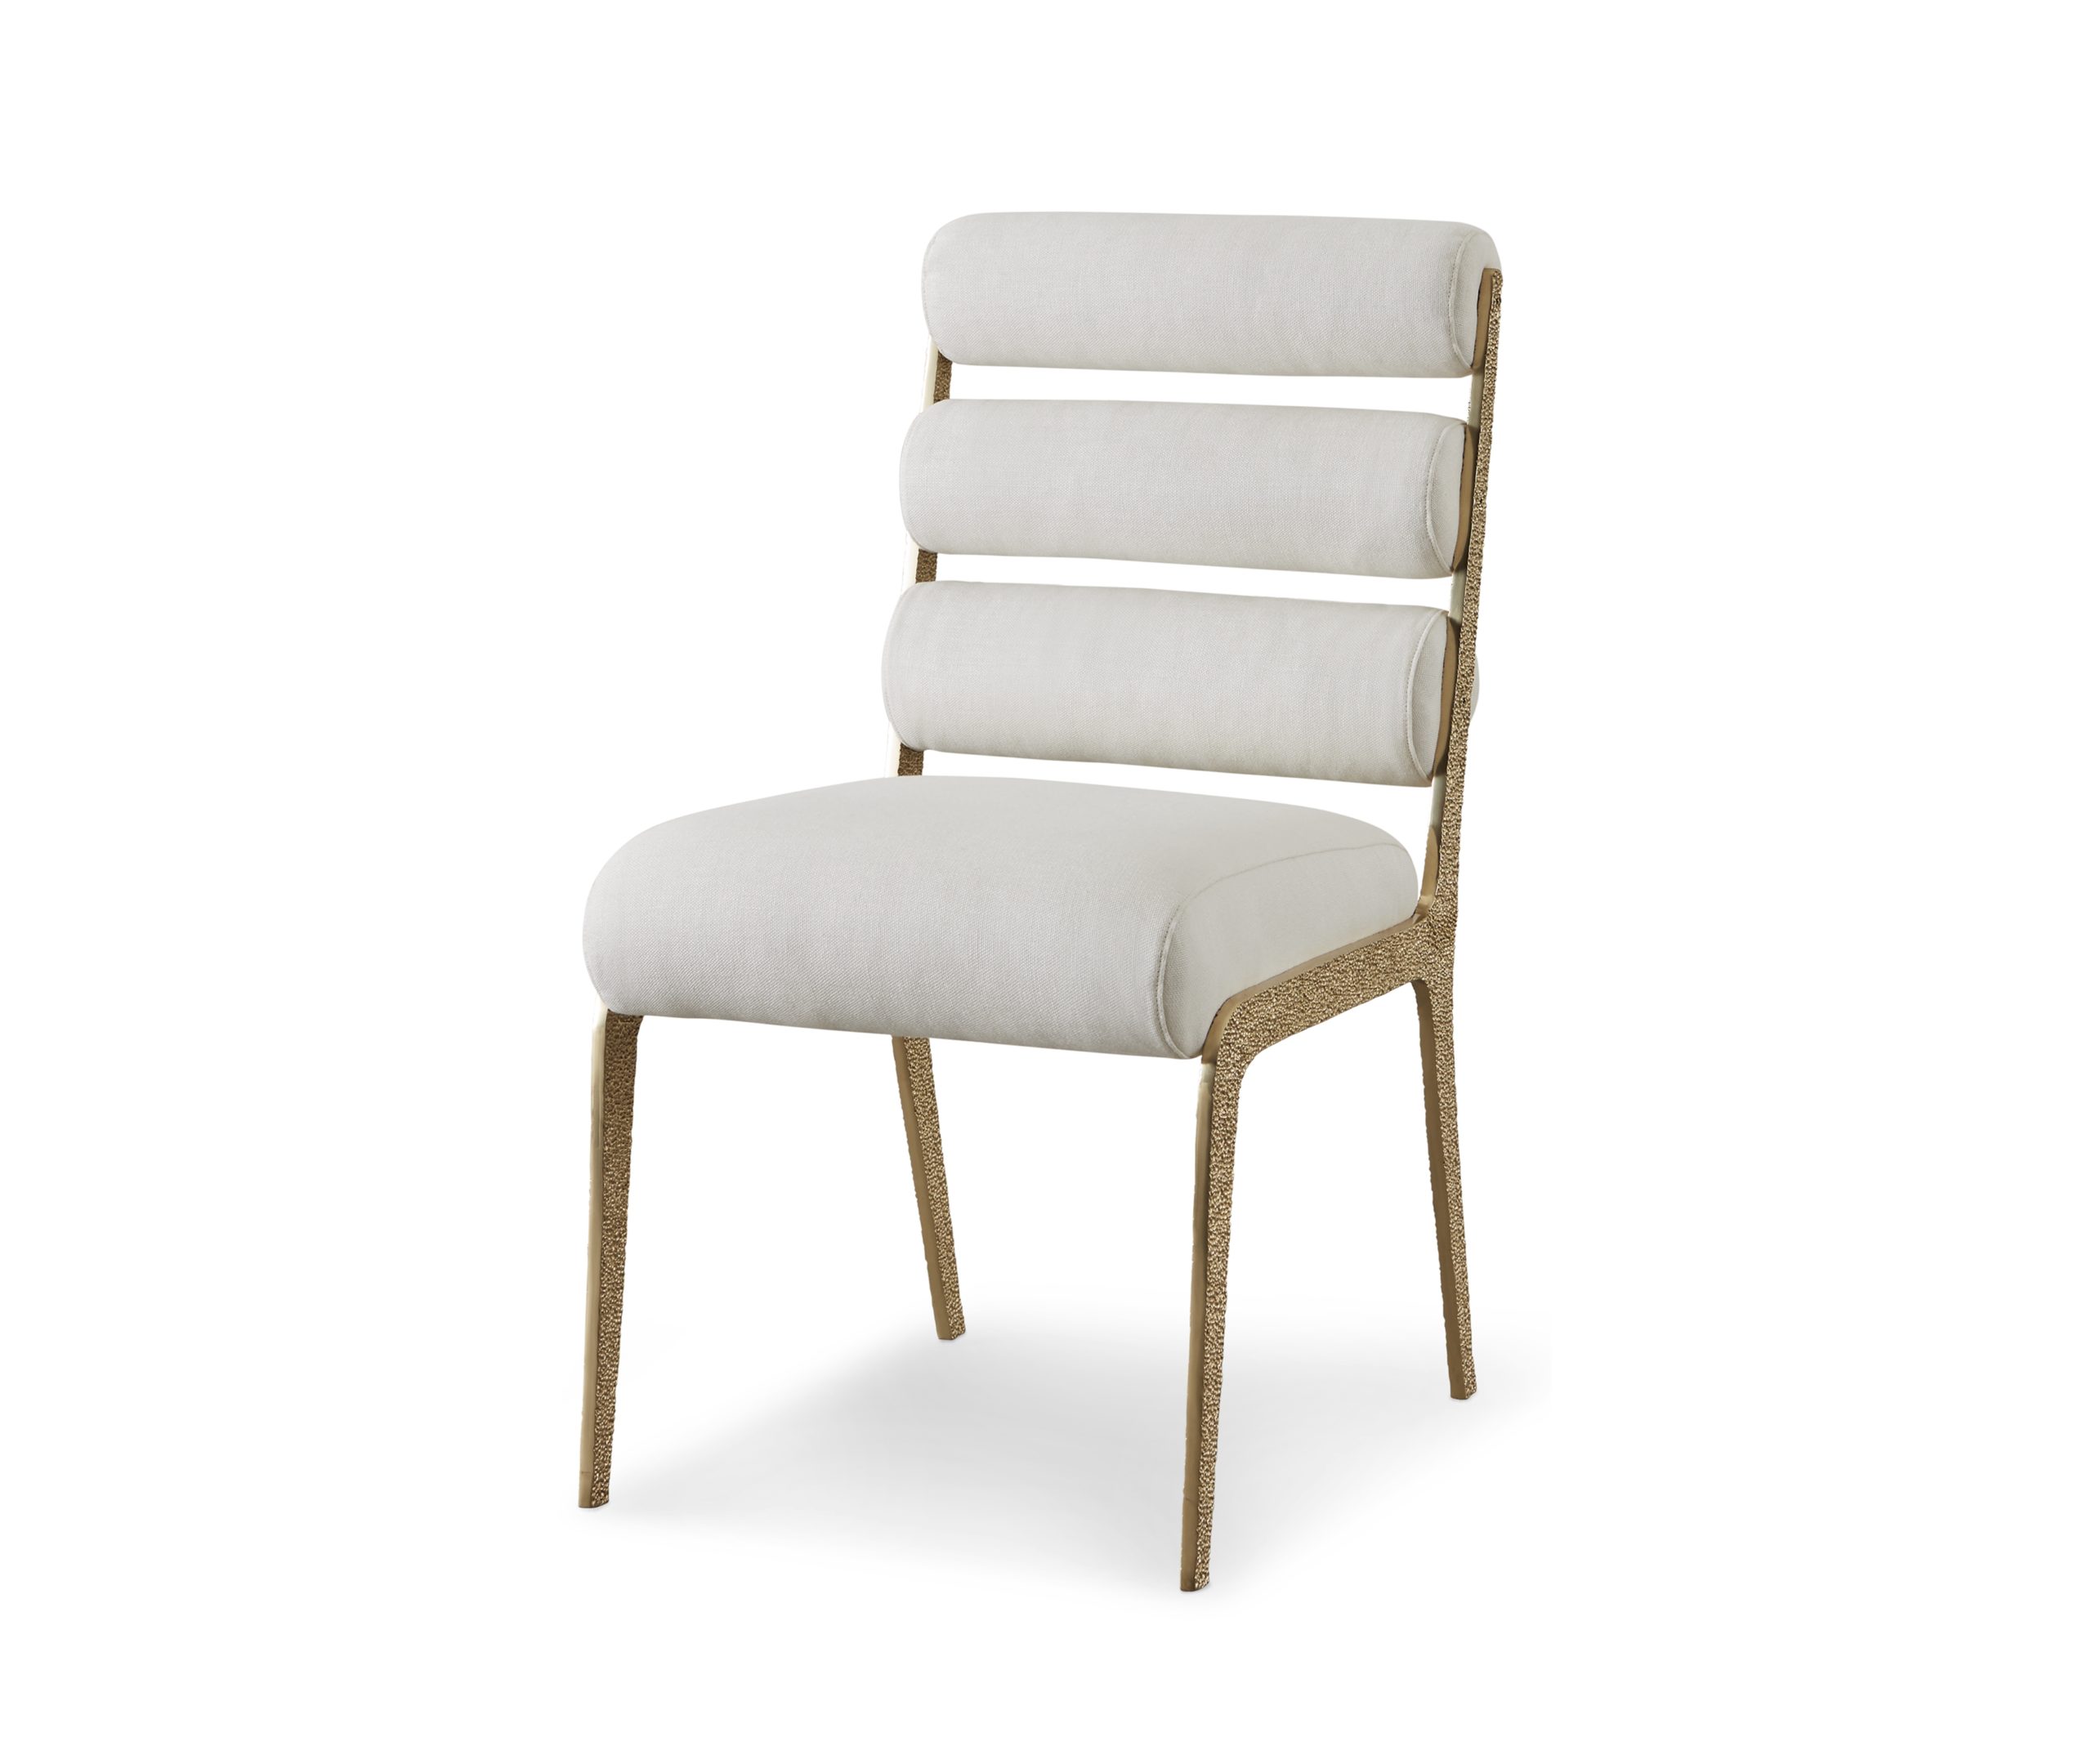 Baker_products_WNWN_lucca_chair_BAA3043_FRONT_3QRT-scaled-2